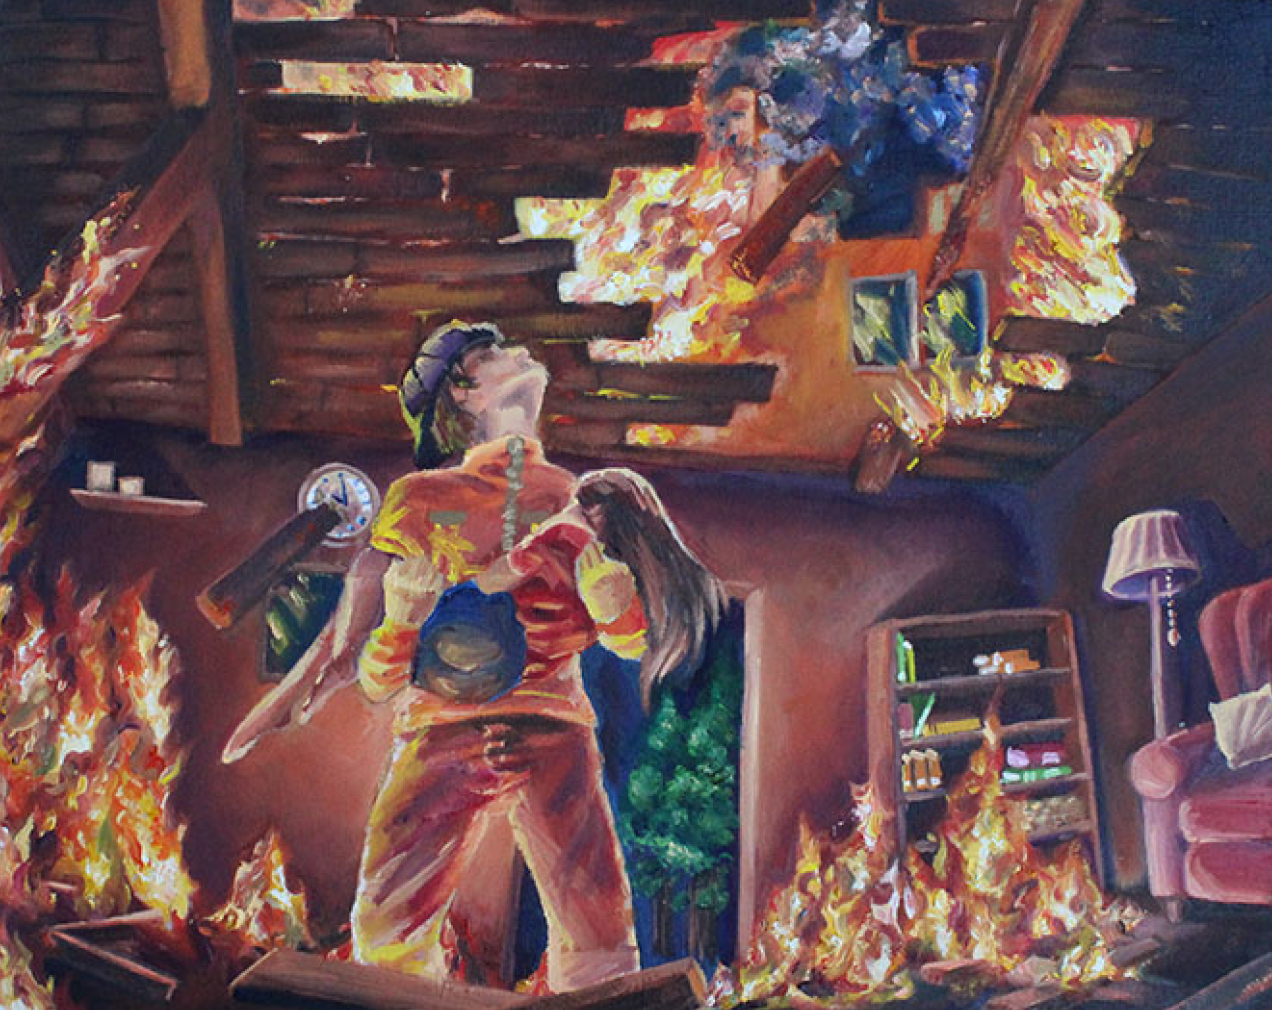 illustration of a firefighter heroically rescuing a person from a burning building